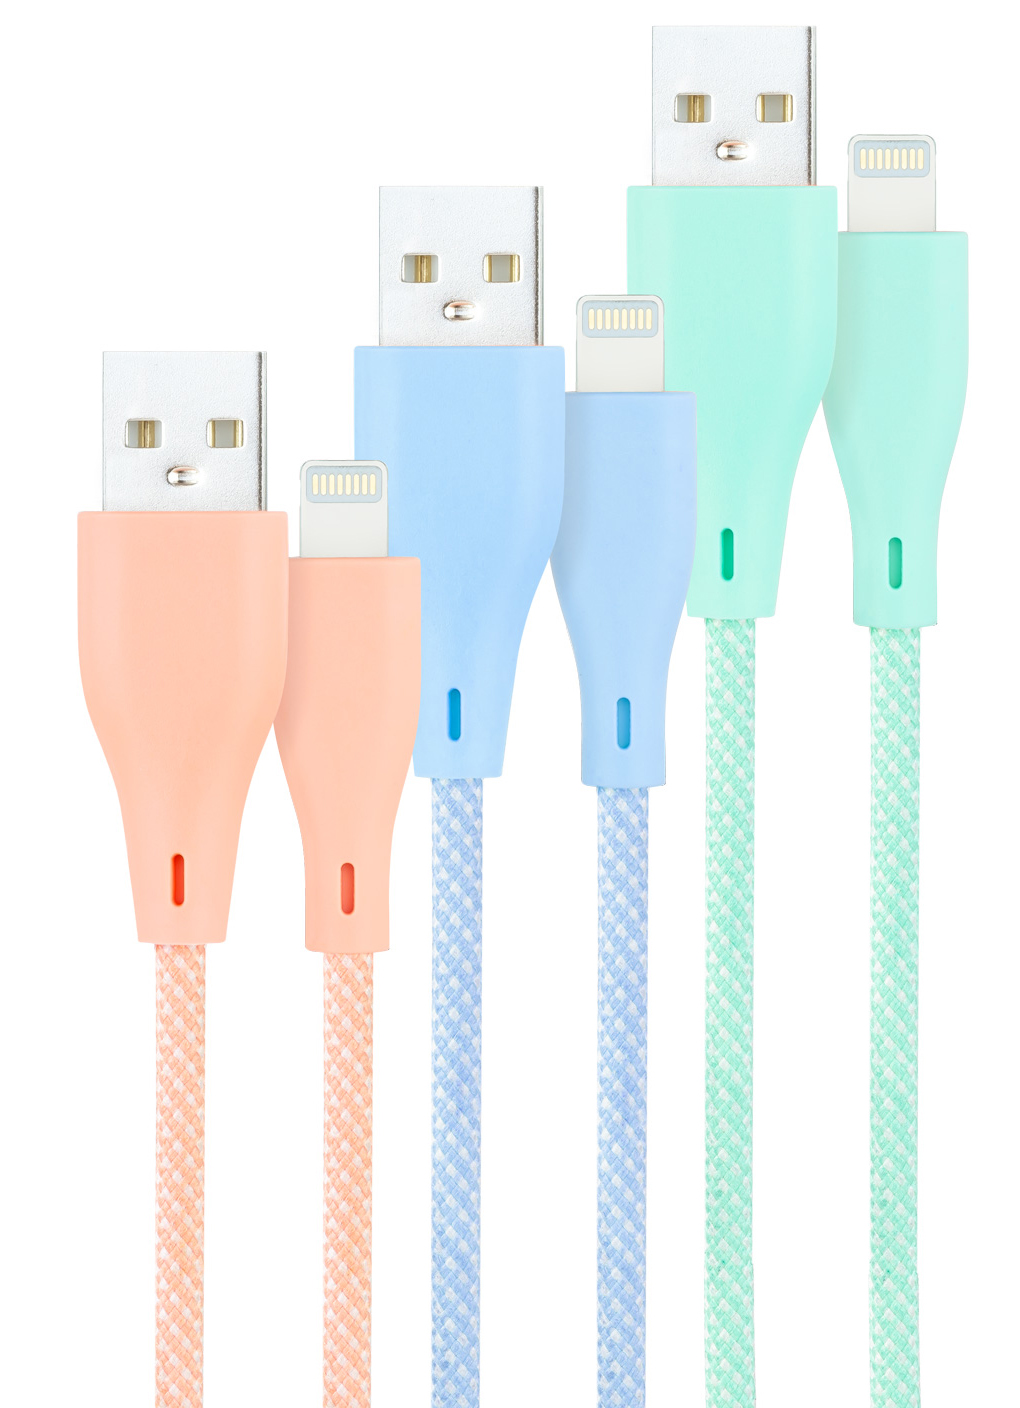 Cabos Lightning Nanocable Lightning para USB A/M Coiled 1M (Pack 3 - Rosa, Azul y Verde)